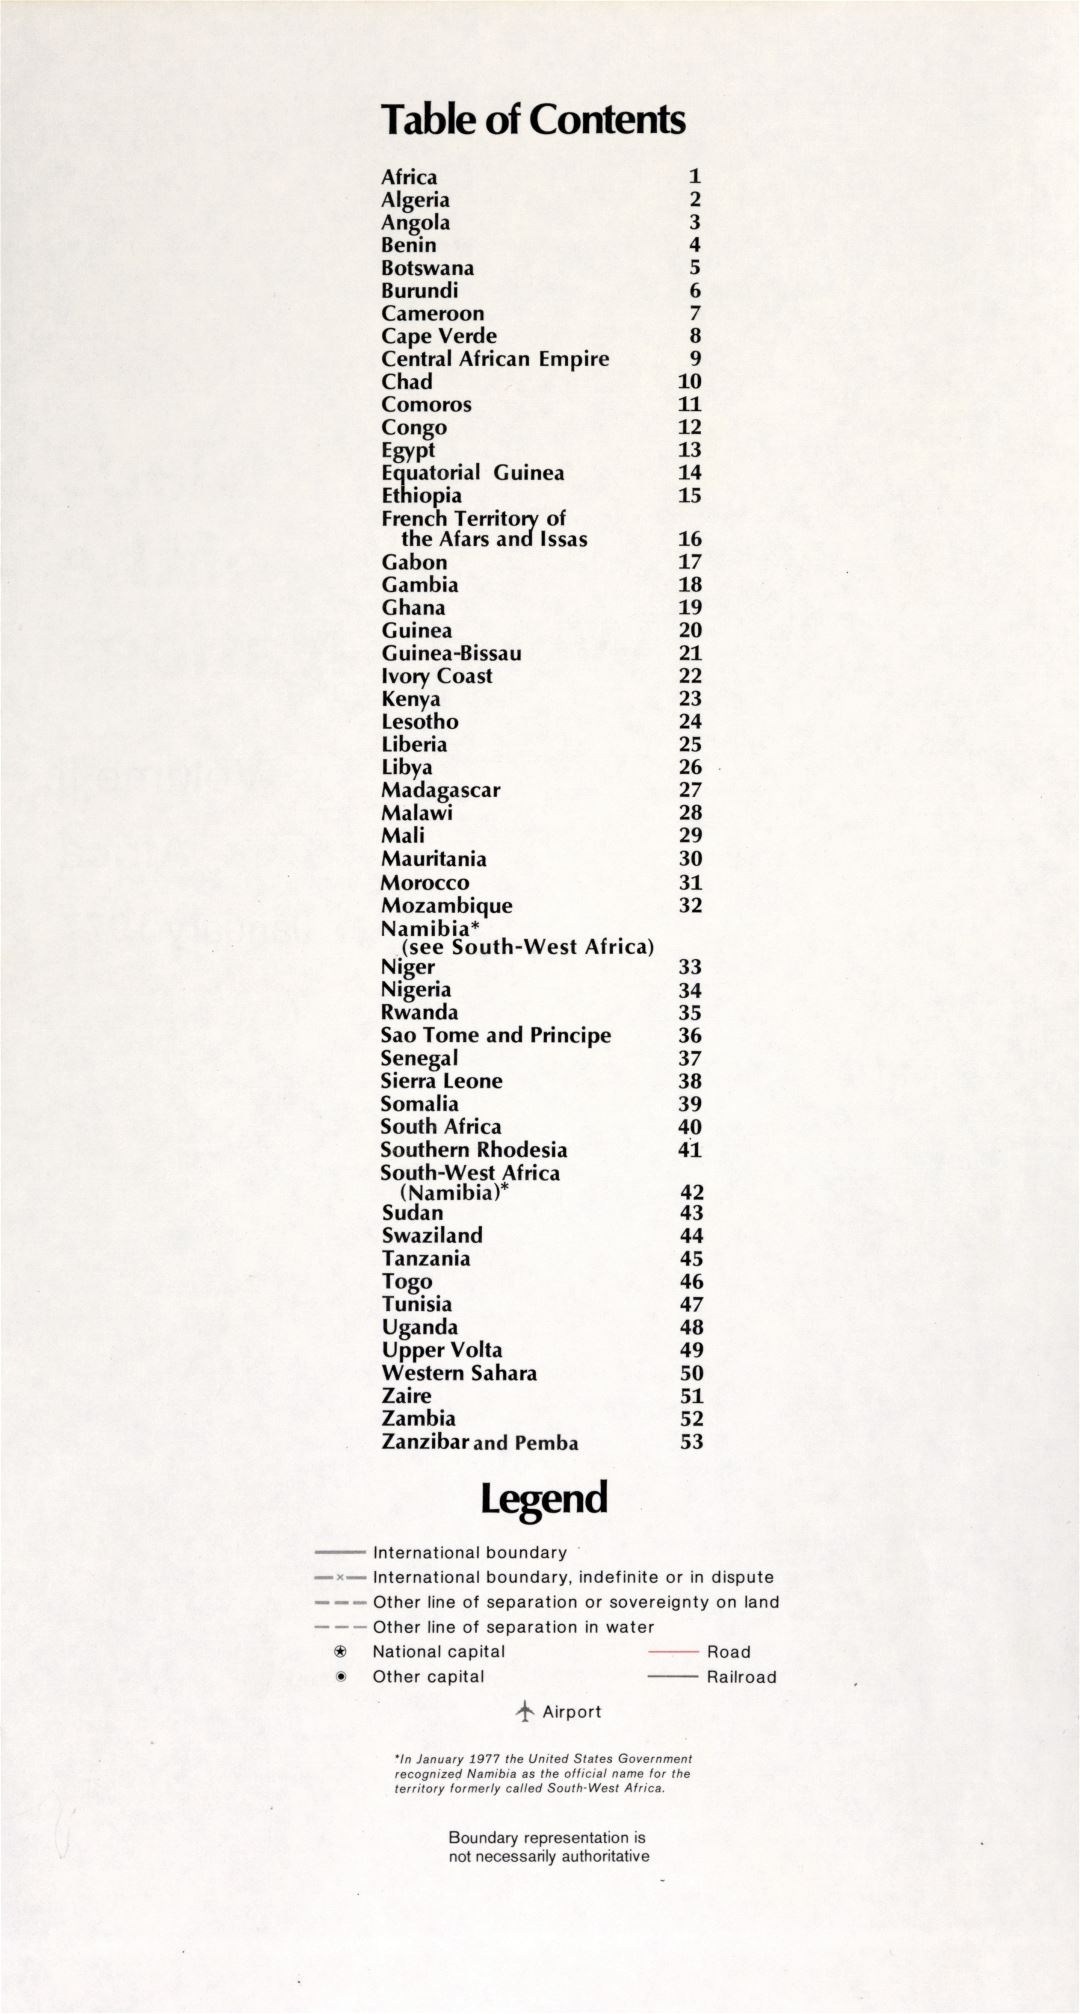 Maps of the World's Nations - Africa (table of contents and legend)